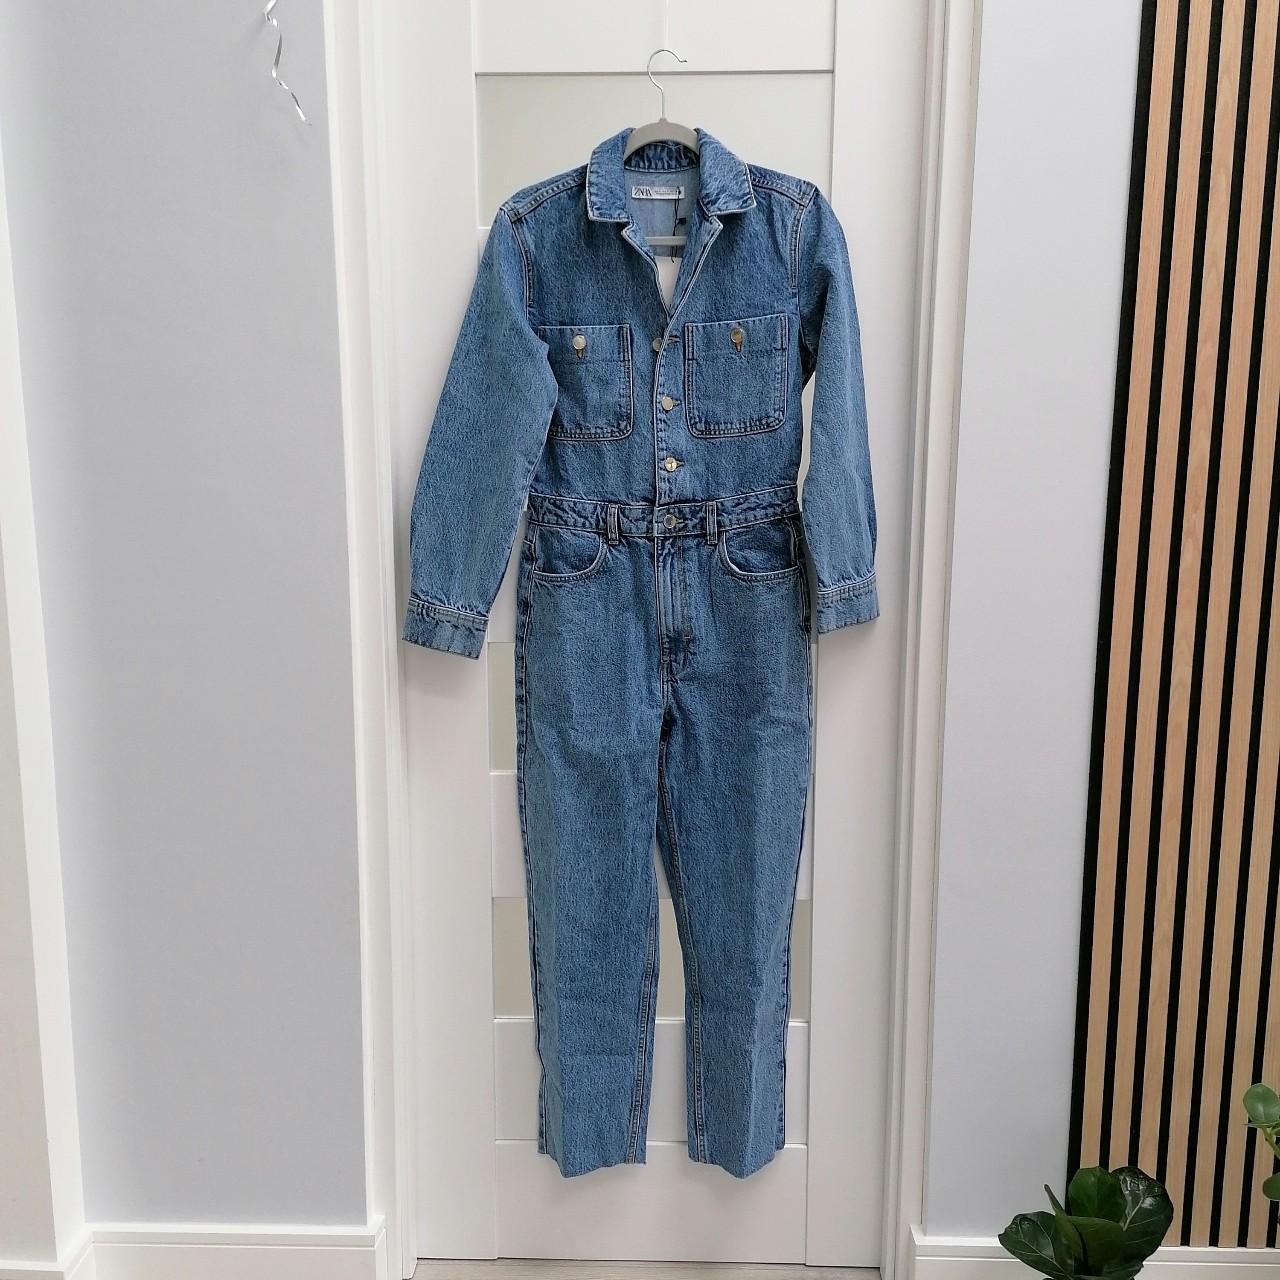 Jumpsuits - TRF | ZARA Greece | Jumpsuits for women, Dungarees, Women jeans